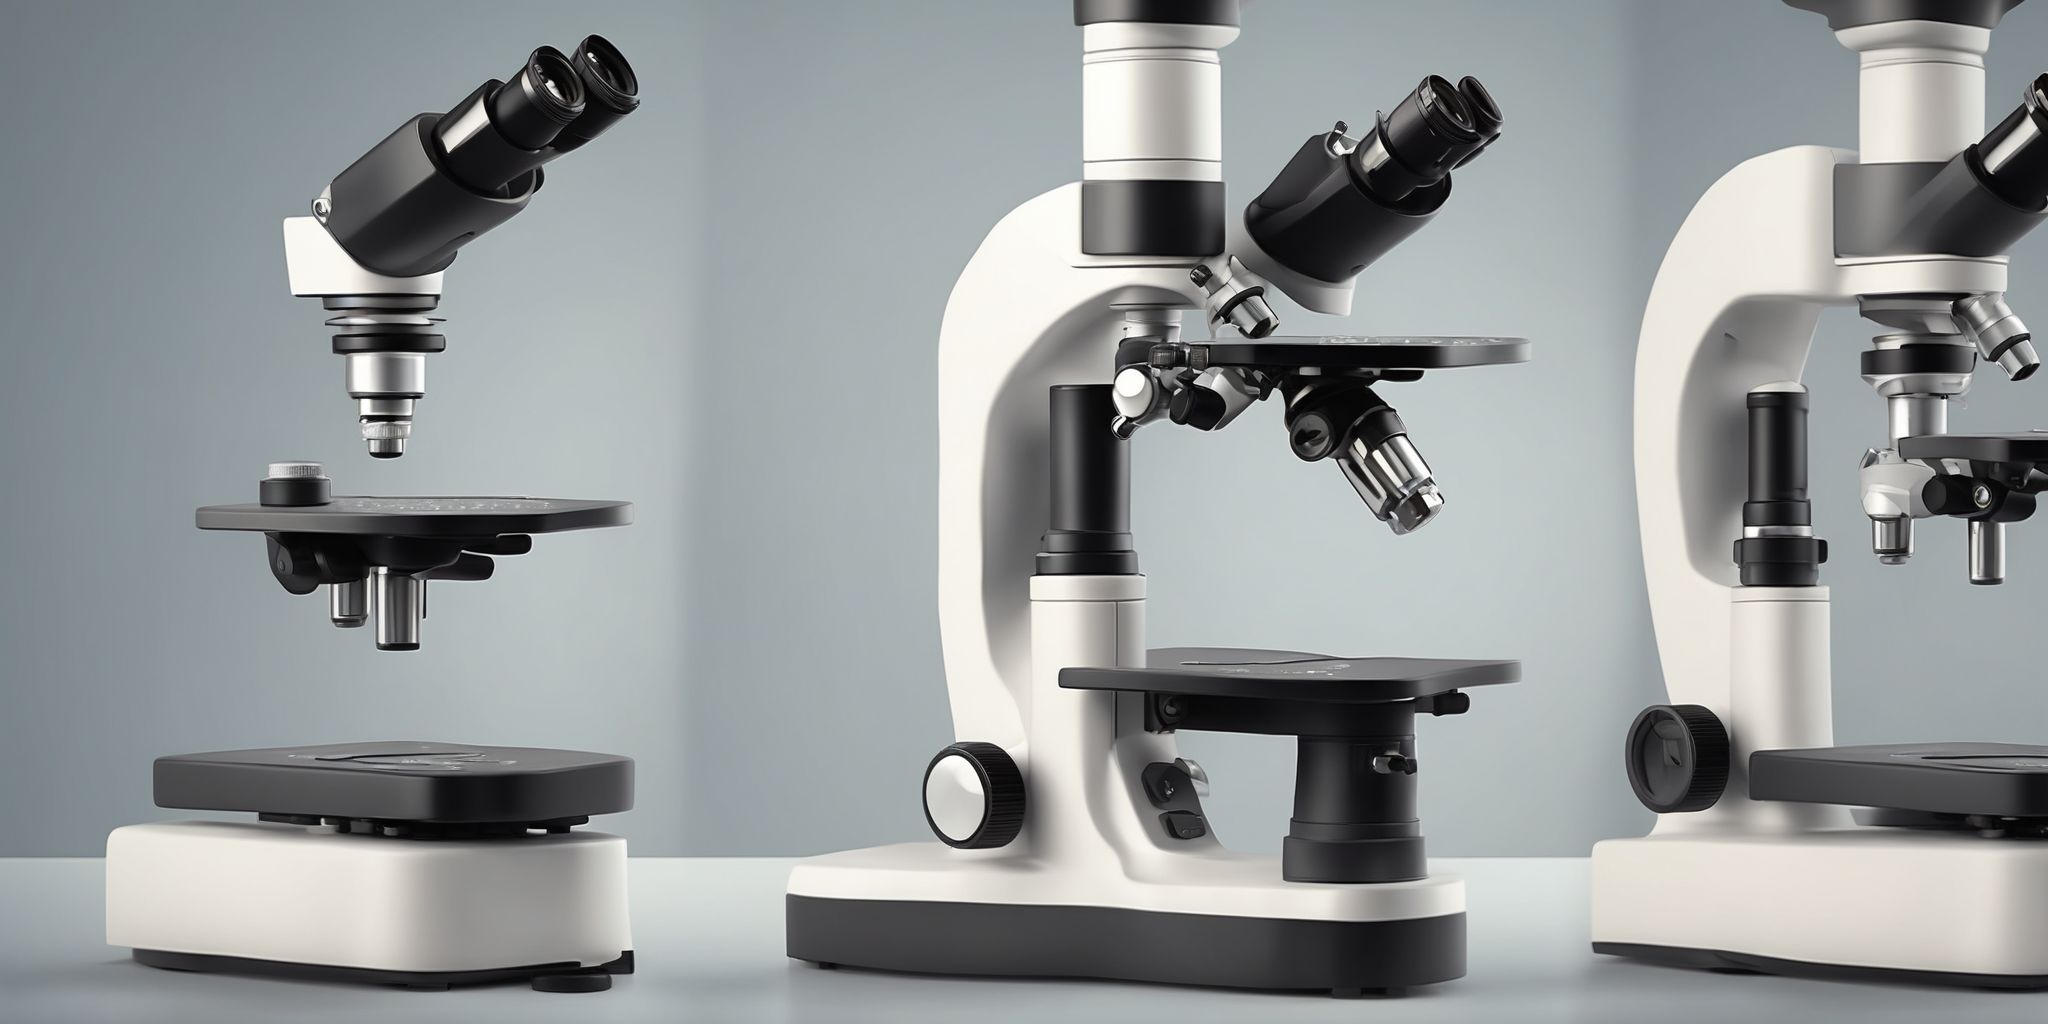 Microscope  in realistic, photographic style